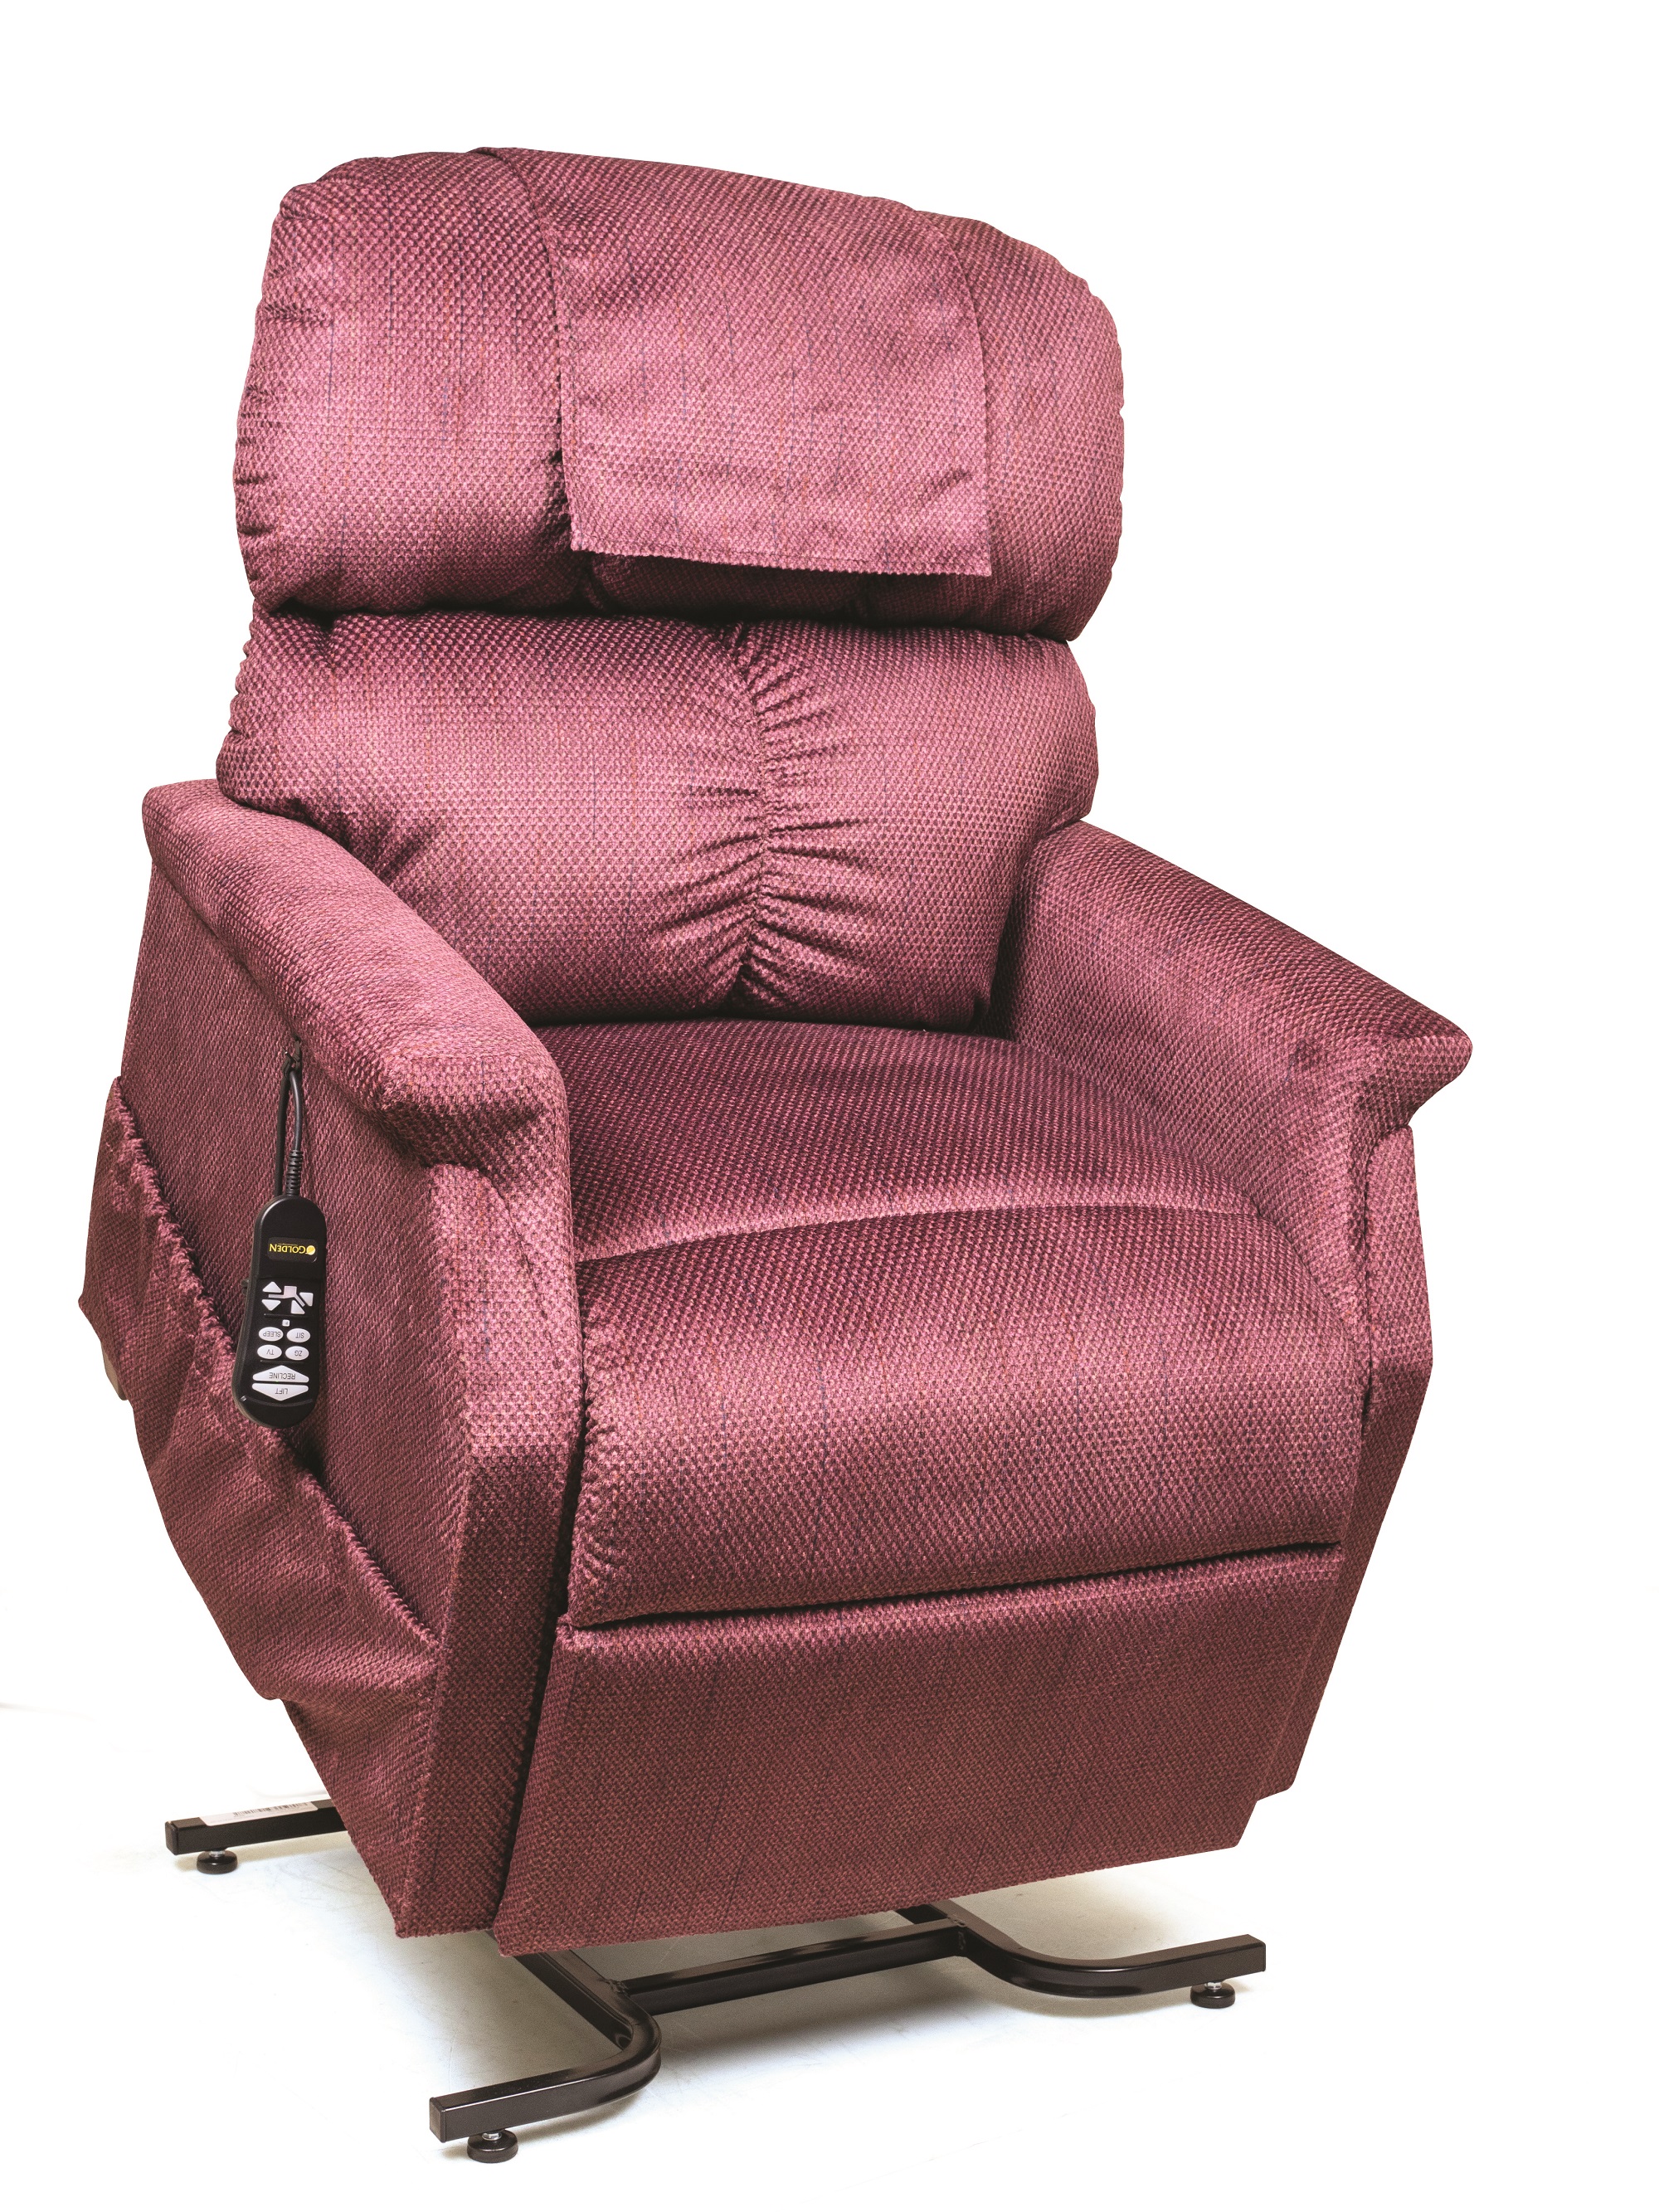 Photo of Golden Technologies Infinite Comforter Lift Chair, Size Large